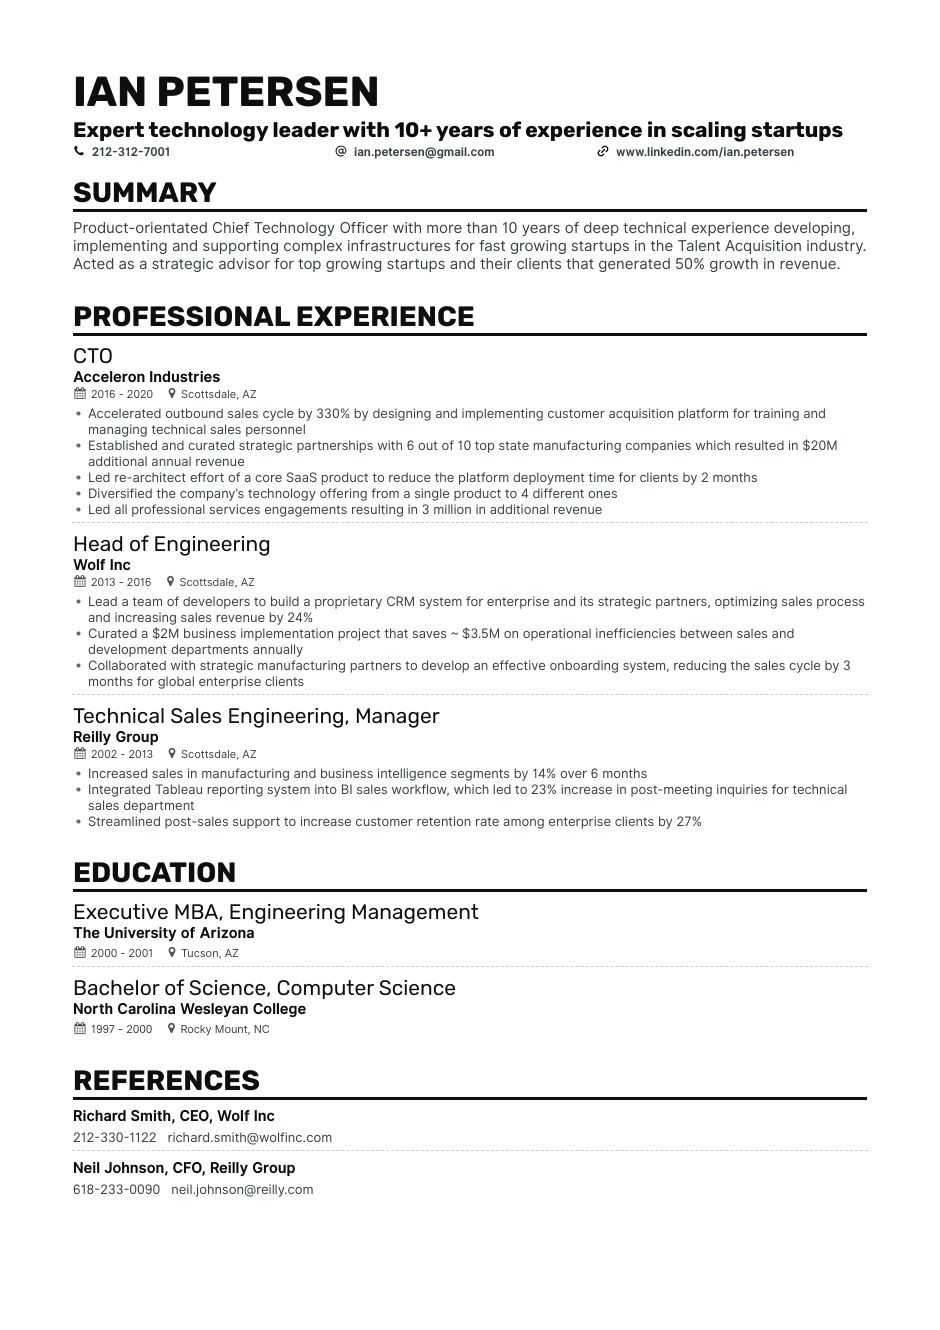 Sample Resume Of 2 Years Experience software Engineer 4 software Engineer Resume Examples and Writing Tips for 2021